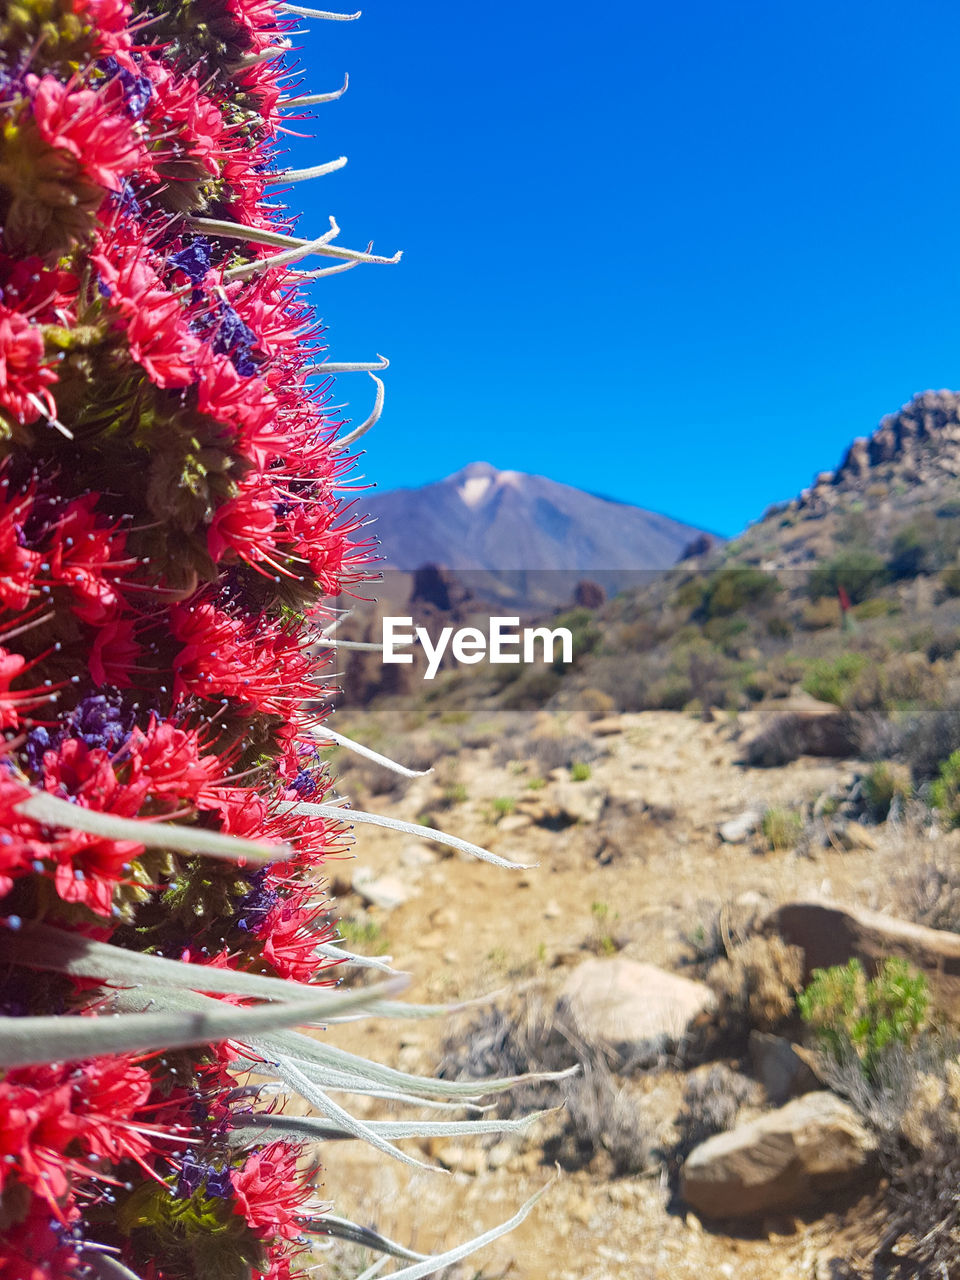 RED FLOWERING PLANT AGAINST MOUNTAIN